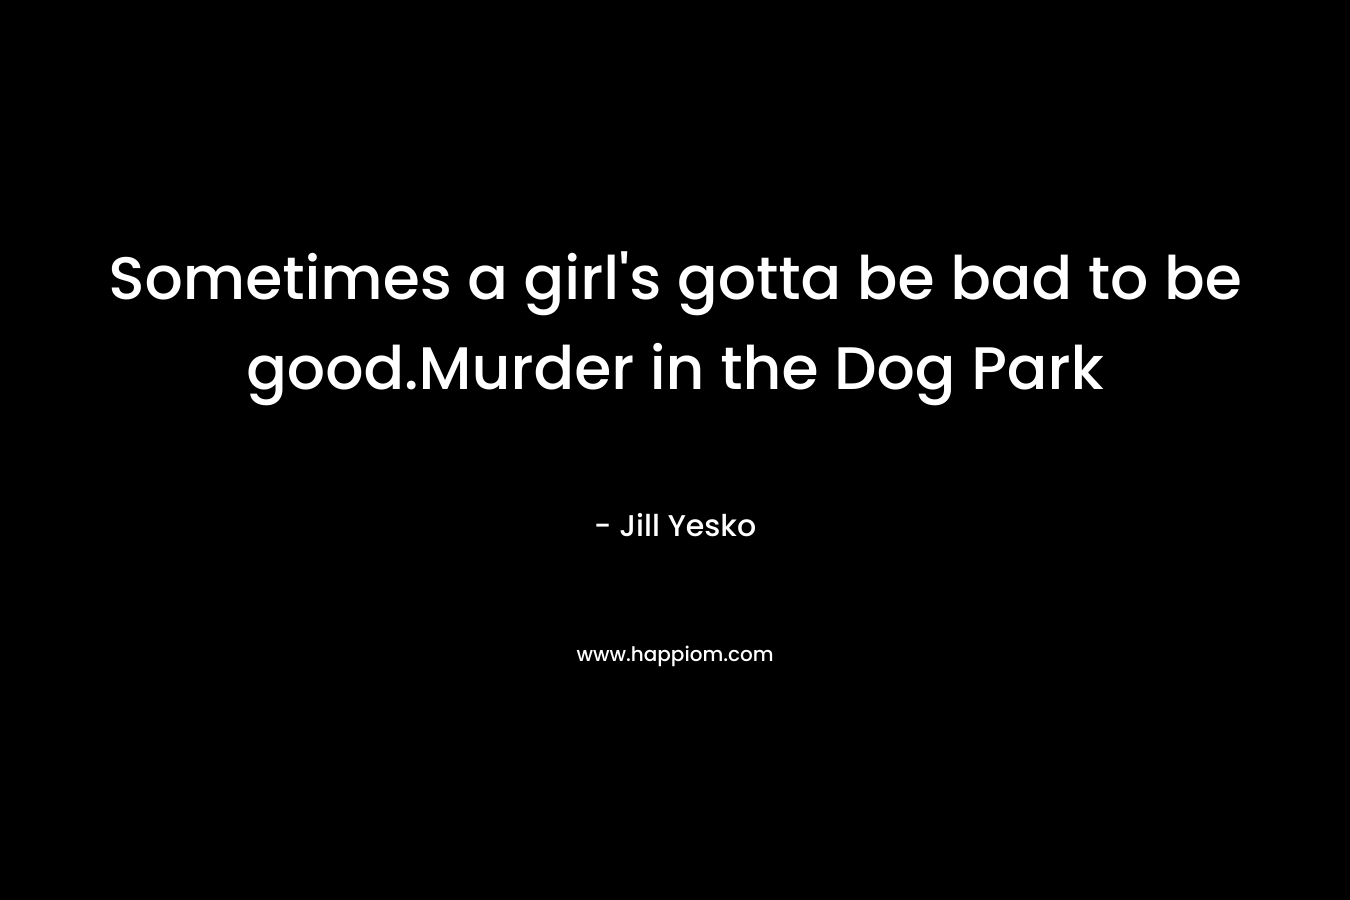 Sometimes a girl's gotta be bad to be good.Murder in the Dog Park